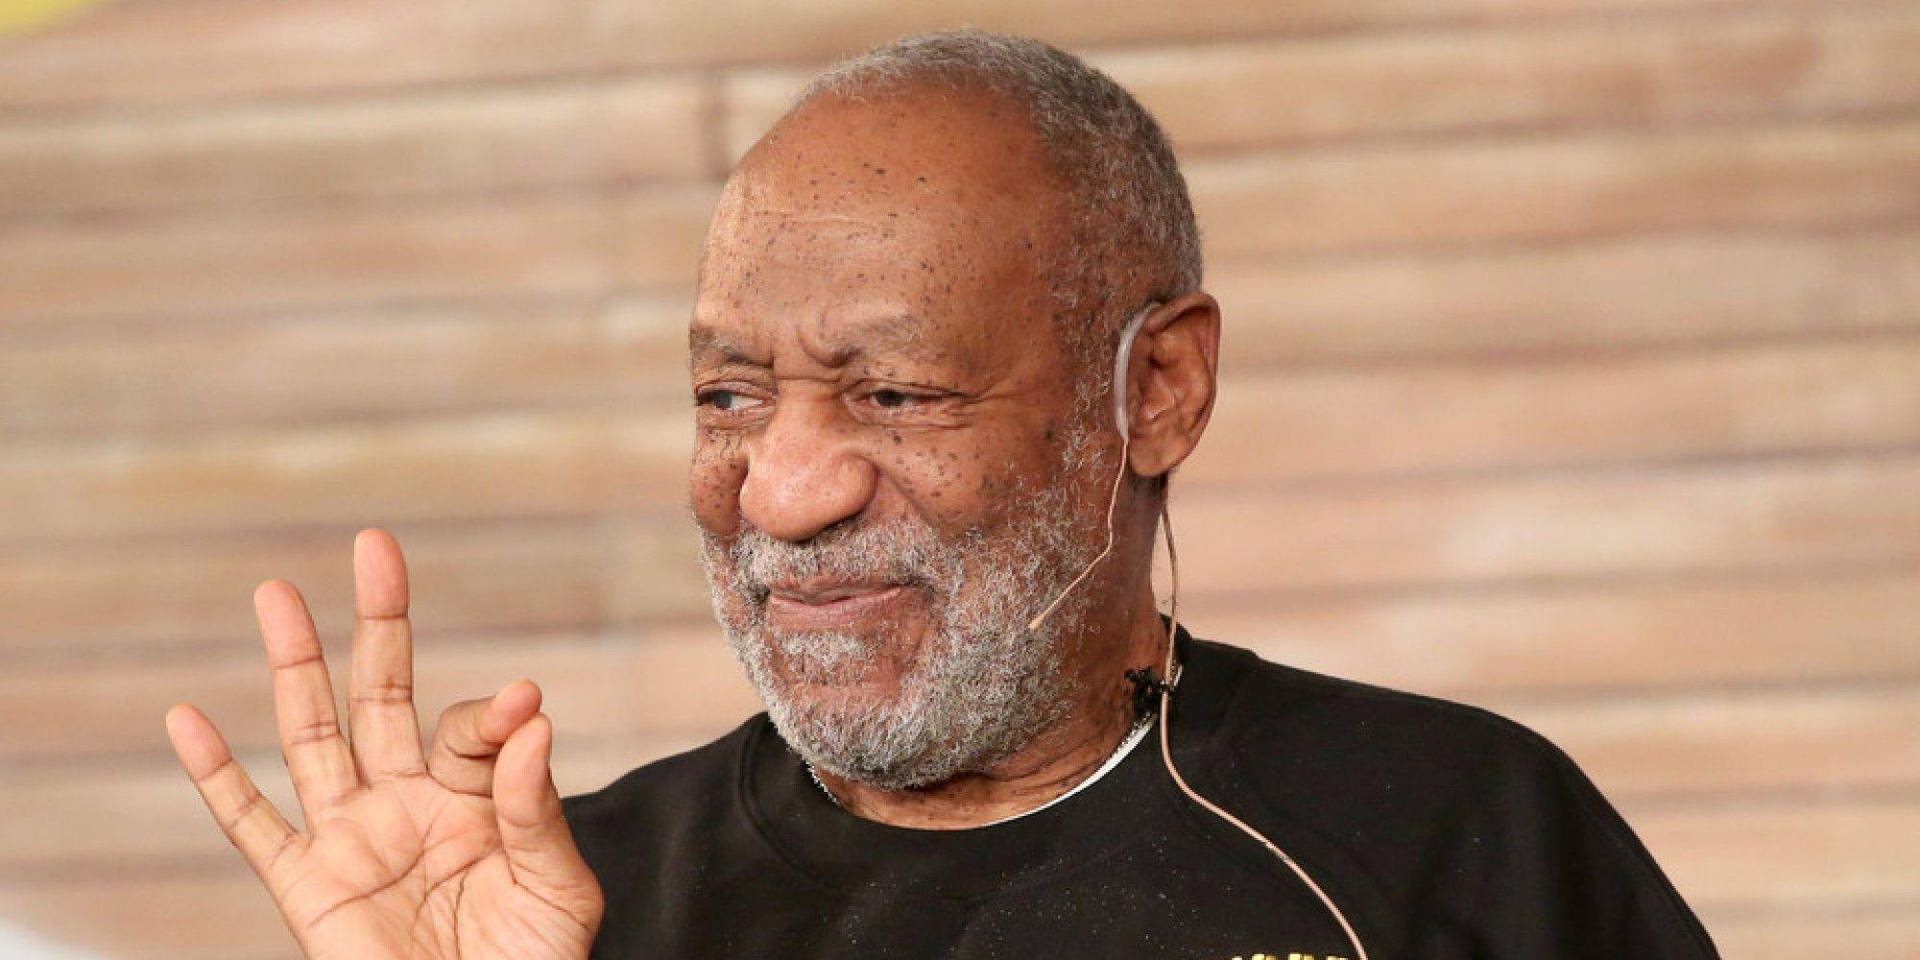 Top 999+ Bill Cosby Wallpapers Full HD, 4K✅Free to Use